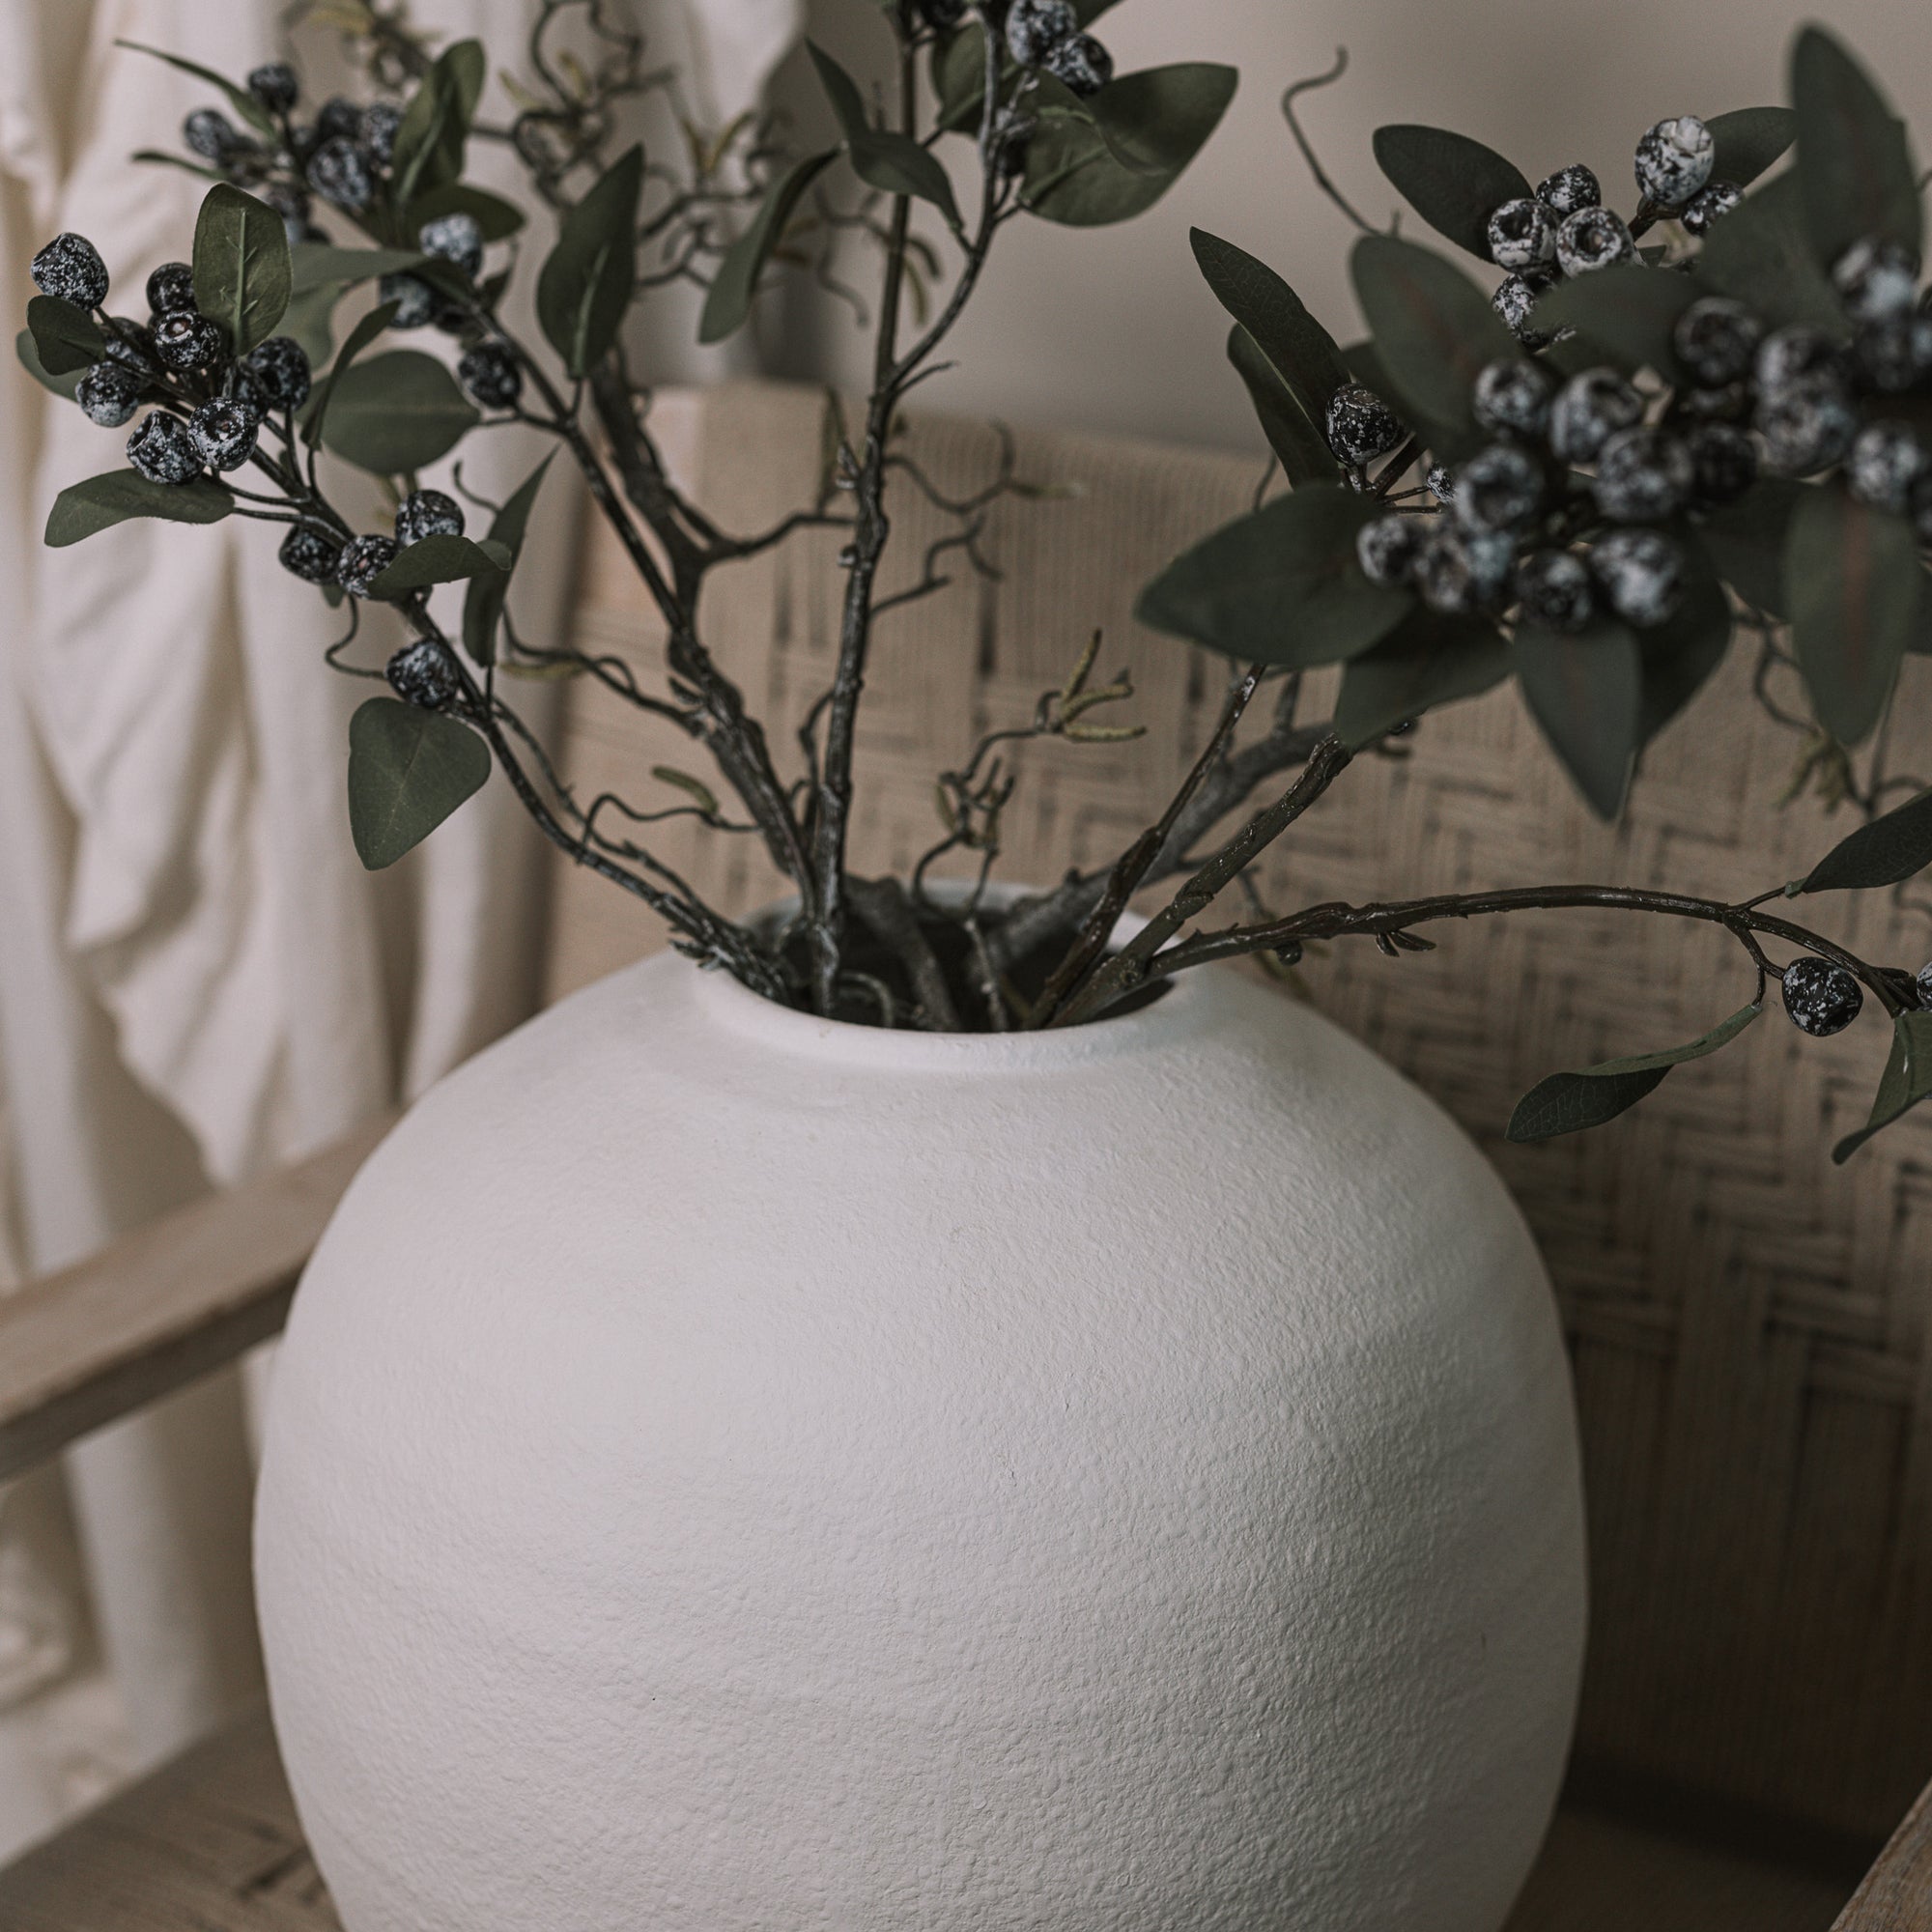 Ceramic round white textured vase with berry sprays and branches on a woven armchair.